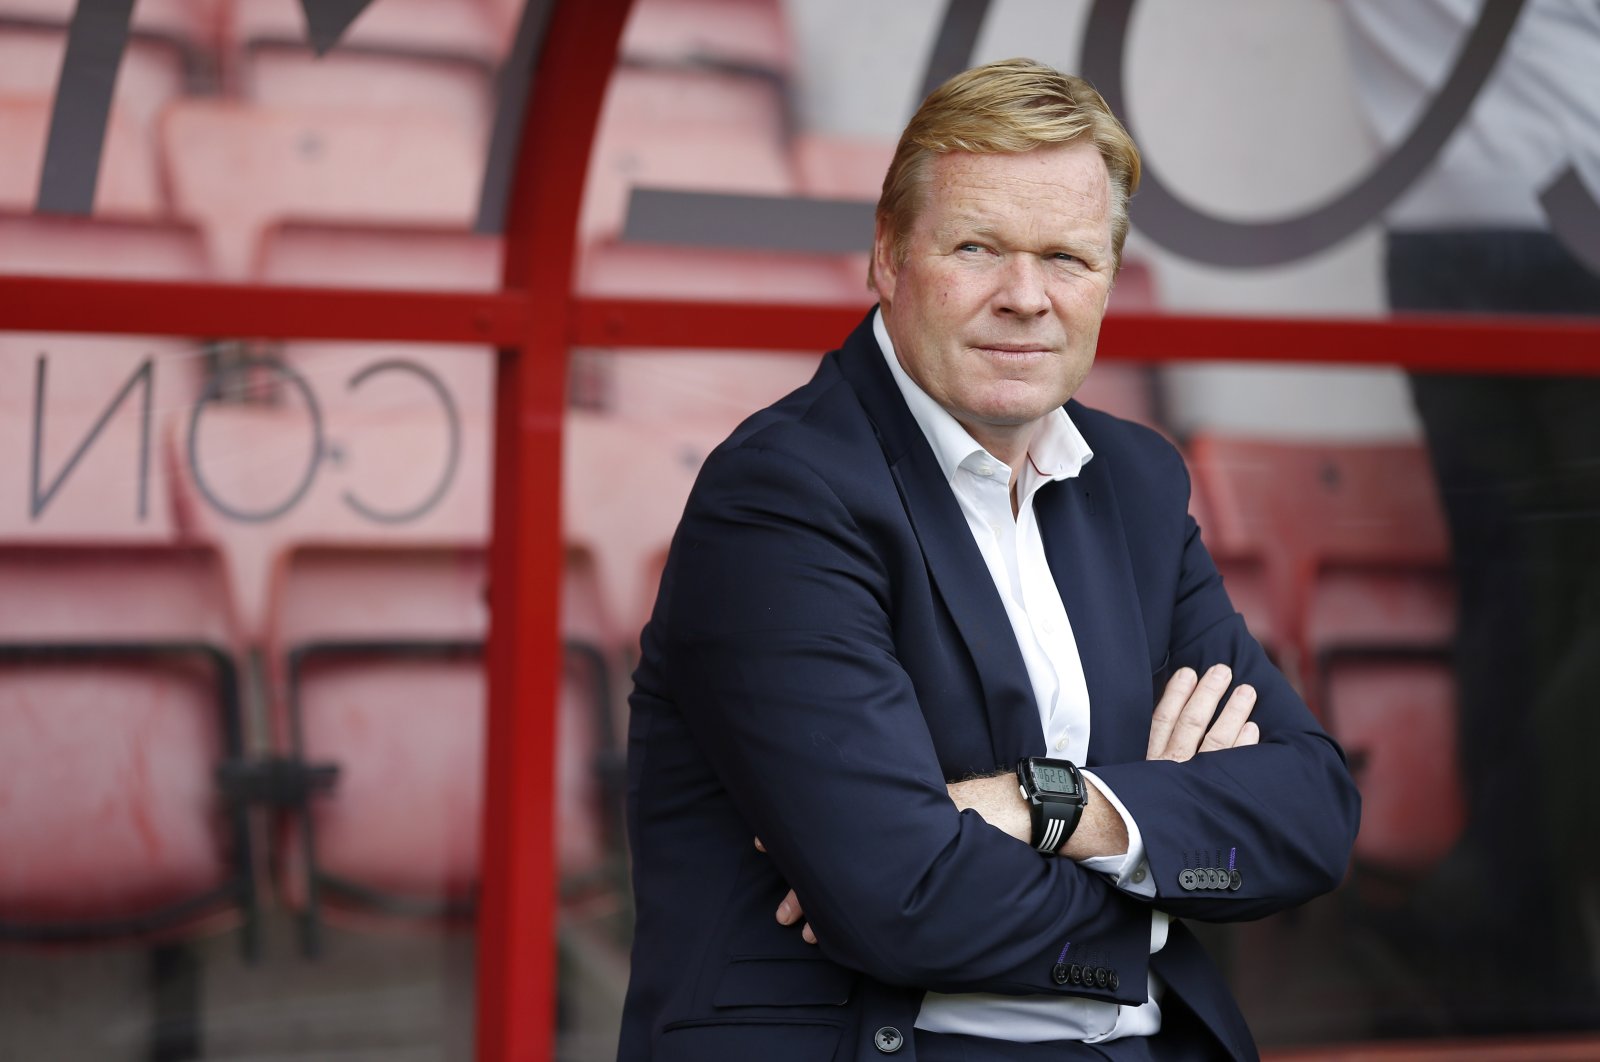 Ronald Koeman before a game between AFC Bournemouth and Everton, in Bournemouth, Britain, Sept. 24, 2016. (Reuters Photo)